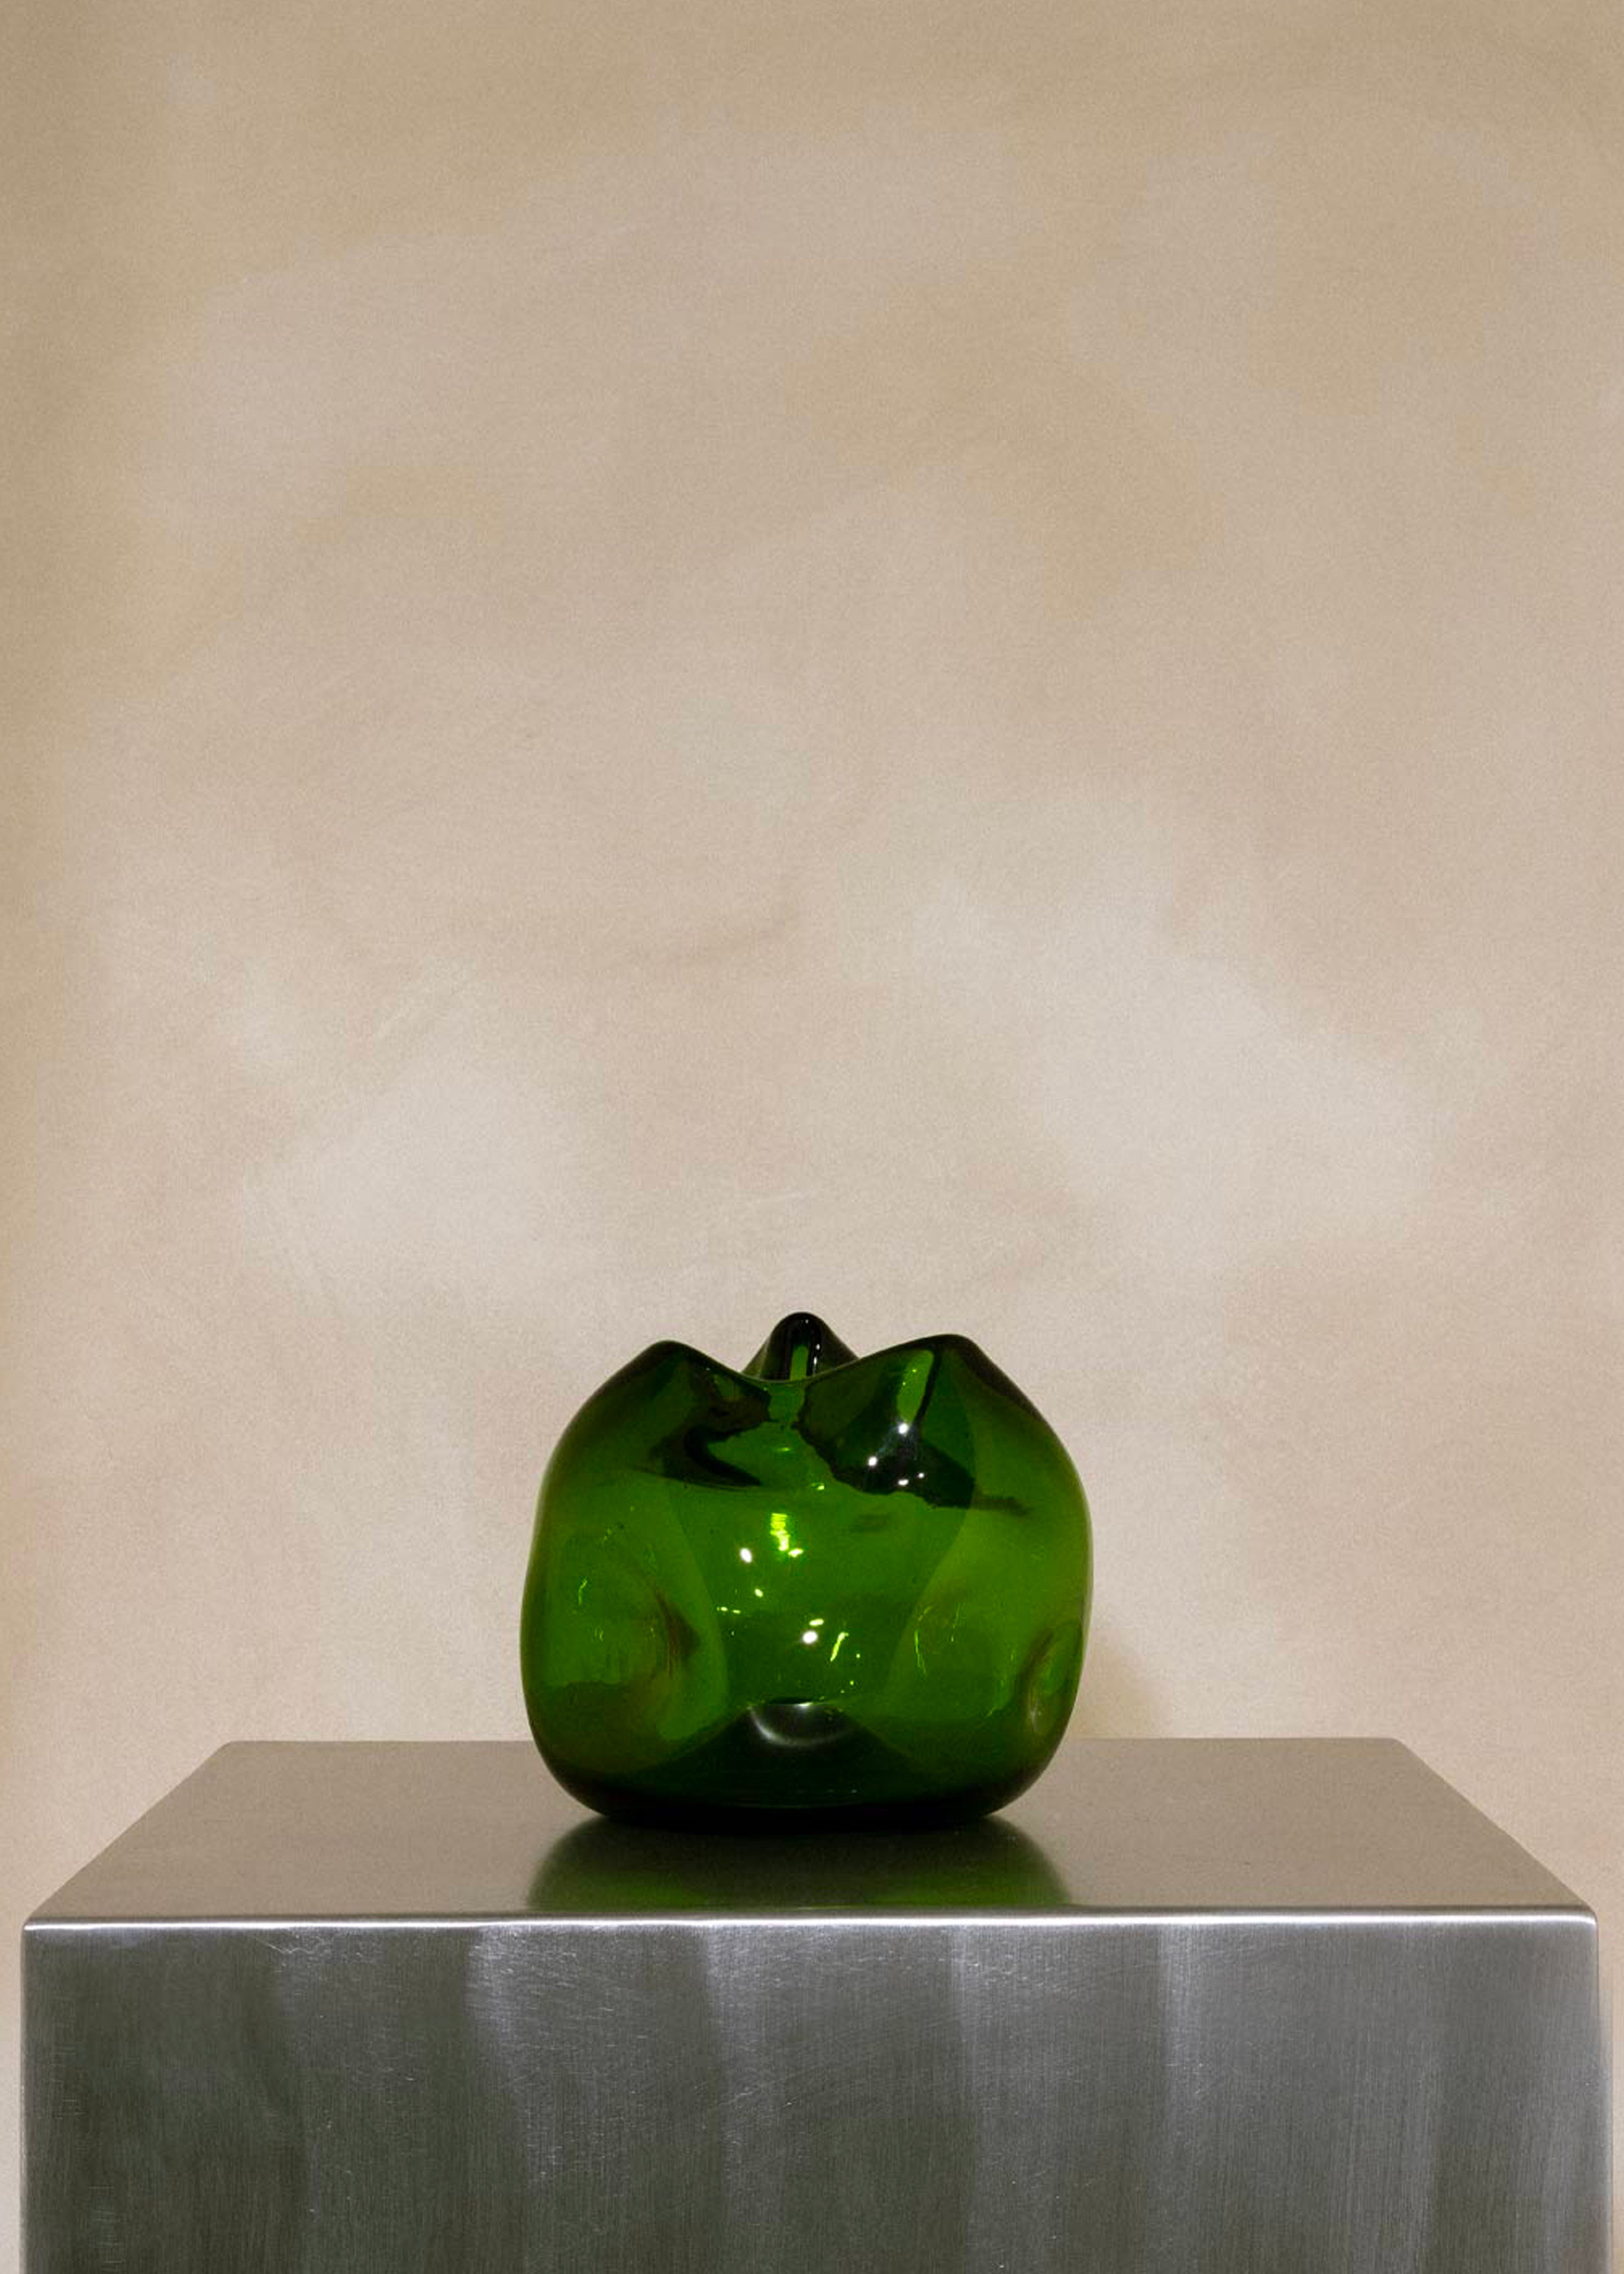 Completedworks The Bubble to End all Bubbles Vase - Green - 4